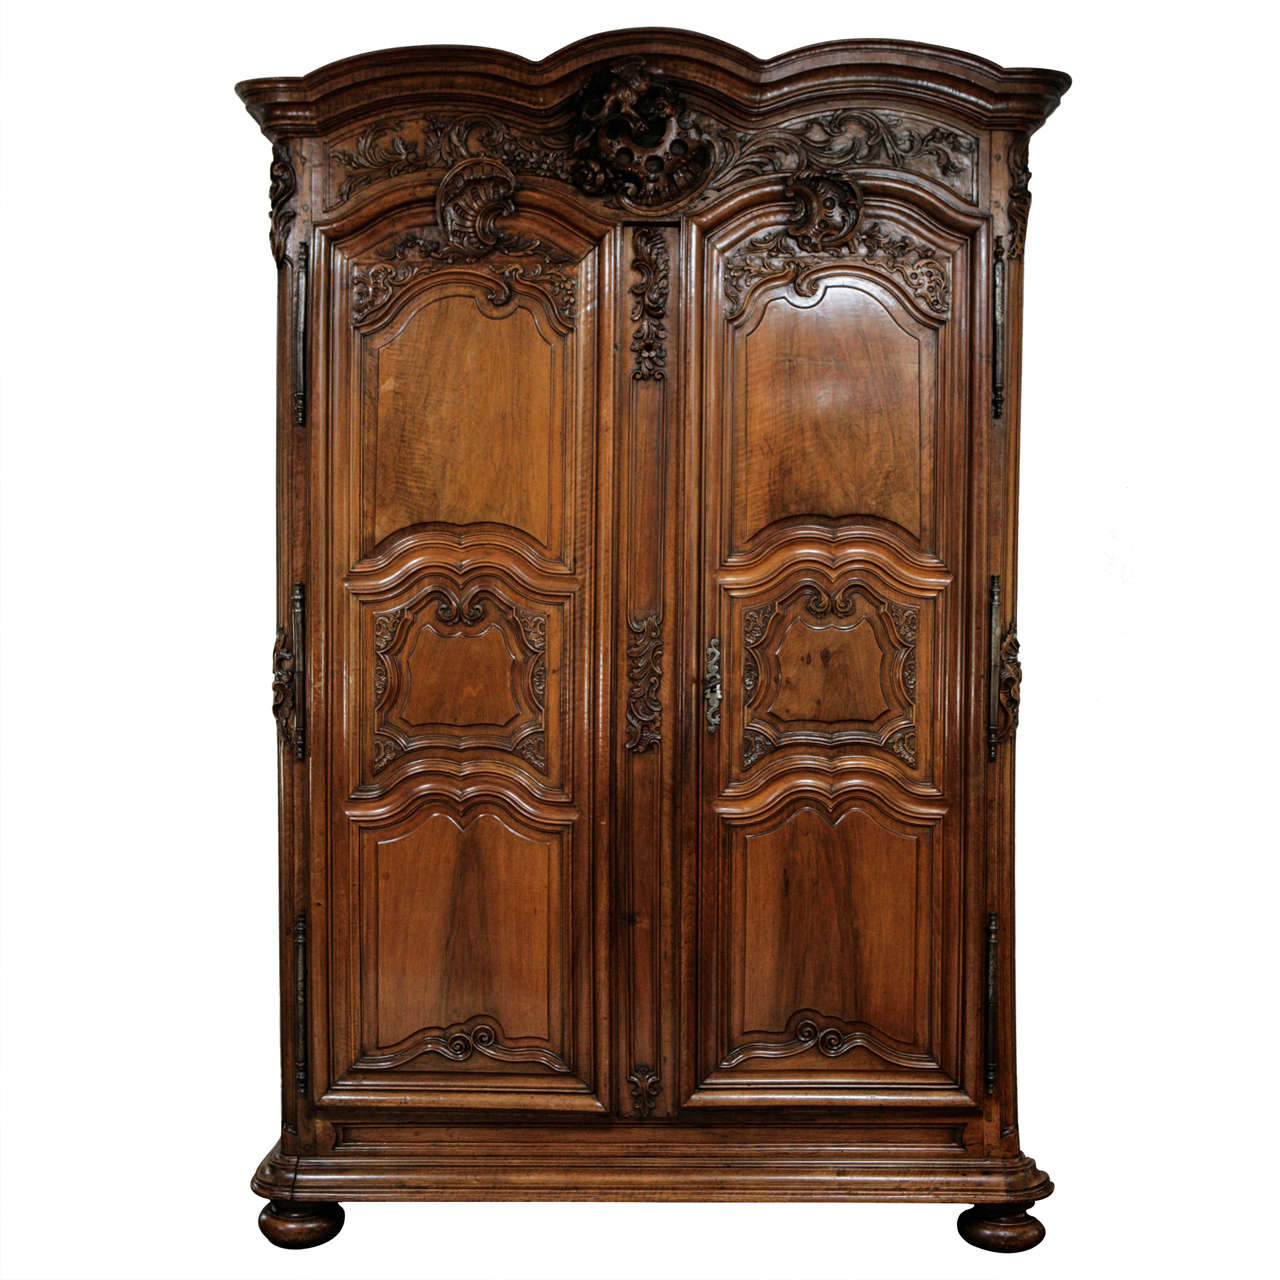 18th Century Period Regence French Carved Walnut Armoire